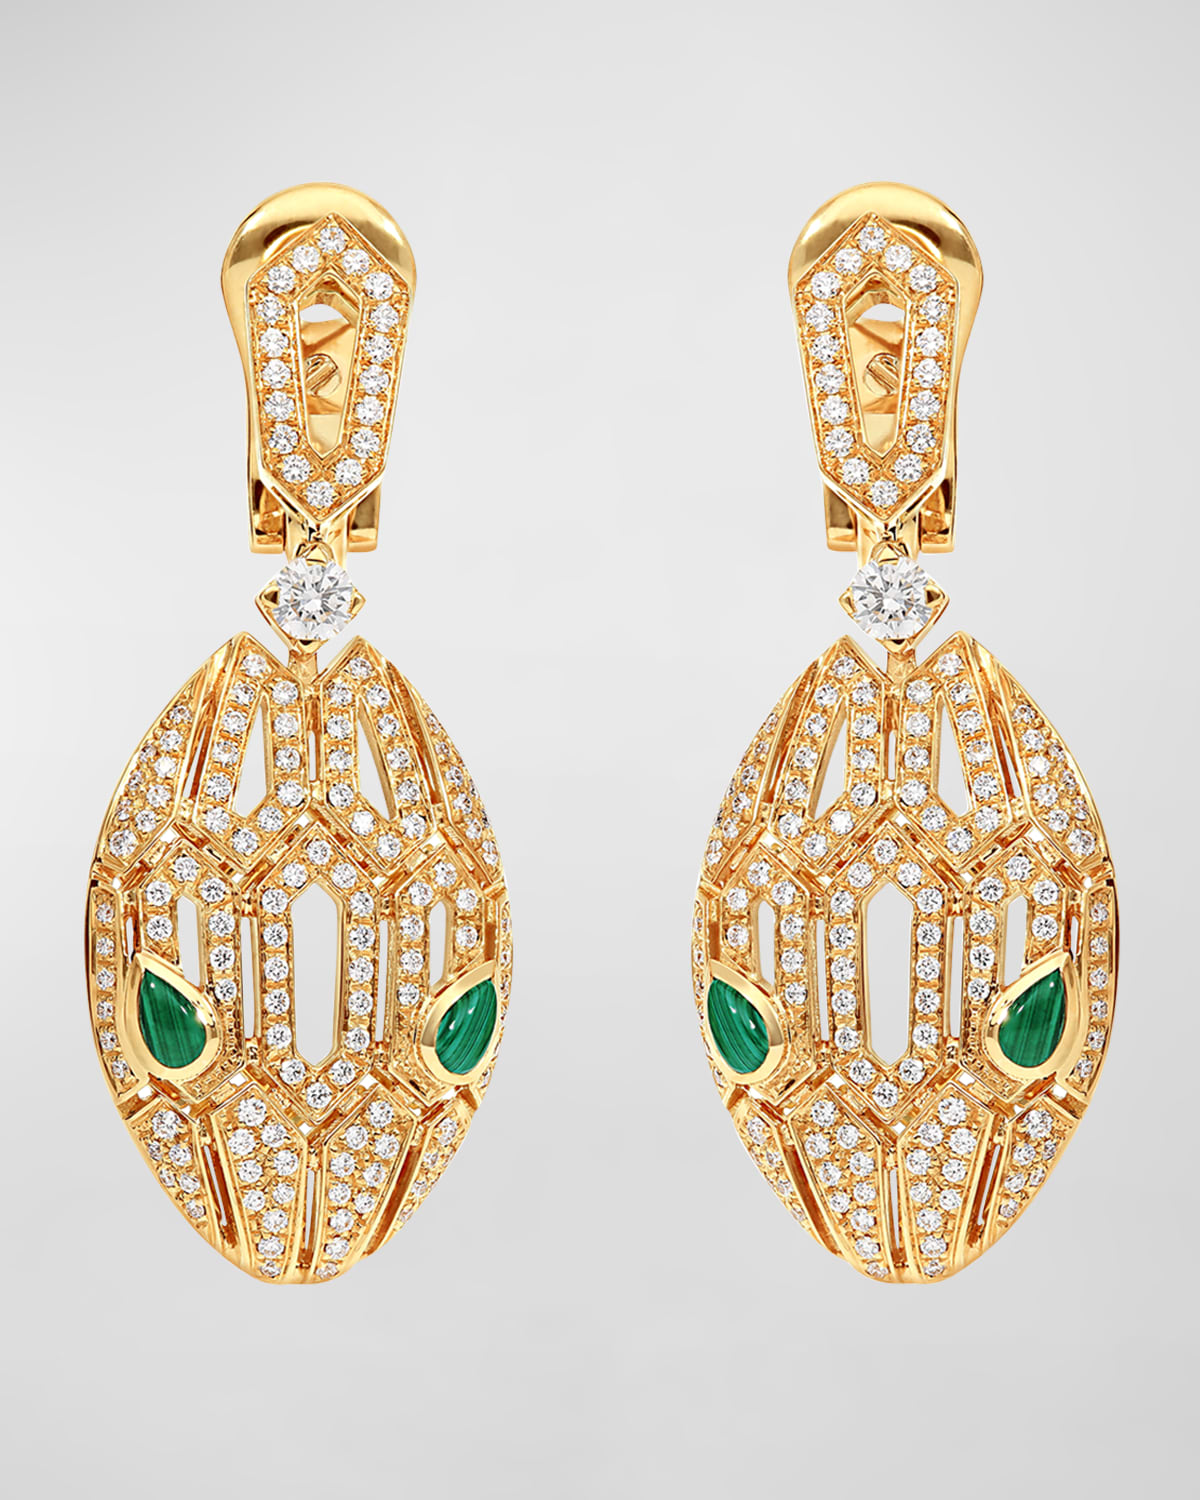 Serpenti Drop Earrings in 18k Rose Gold with Diamonds and Malachite